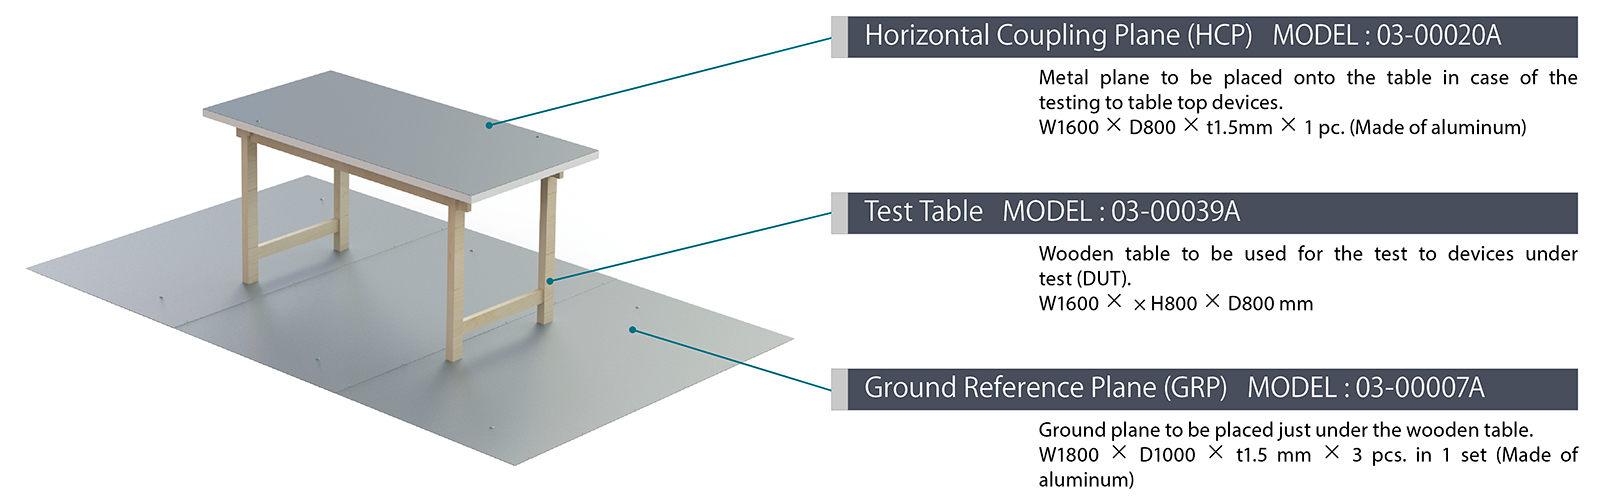 Test Table   MODEL : 03-00039A